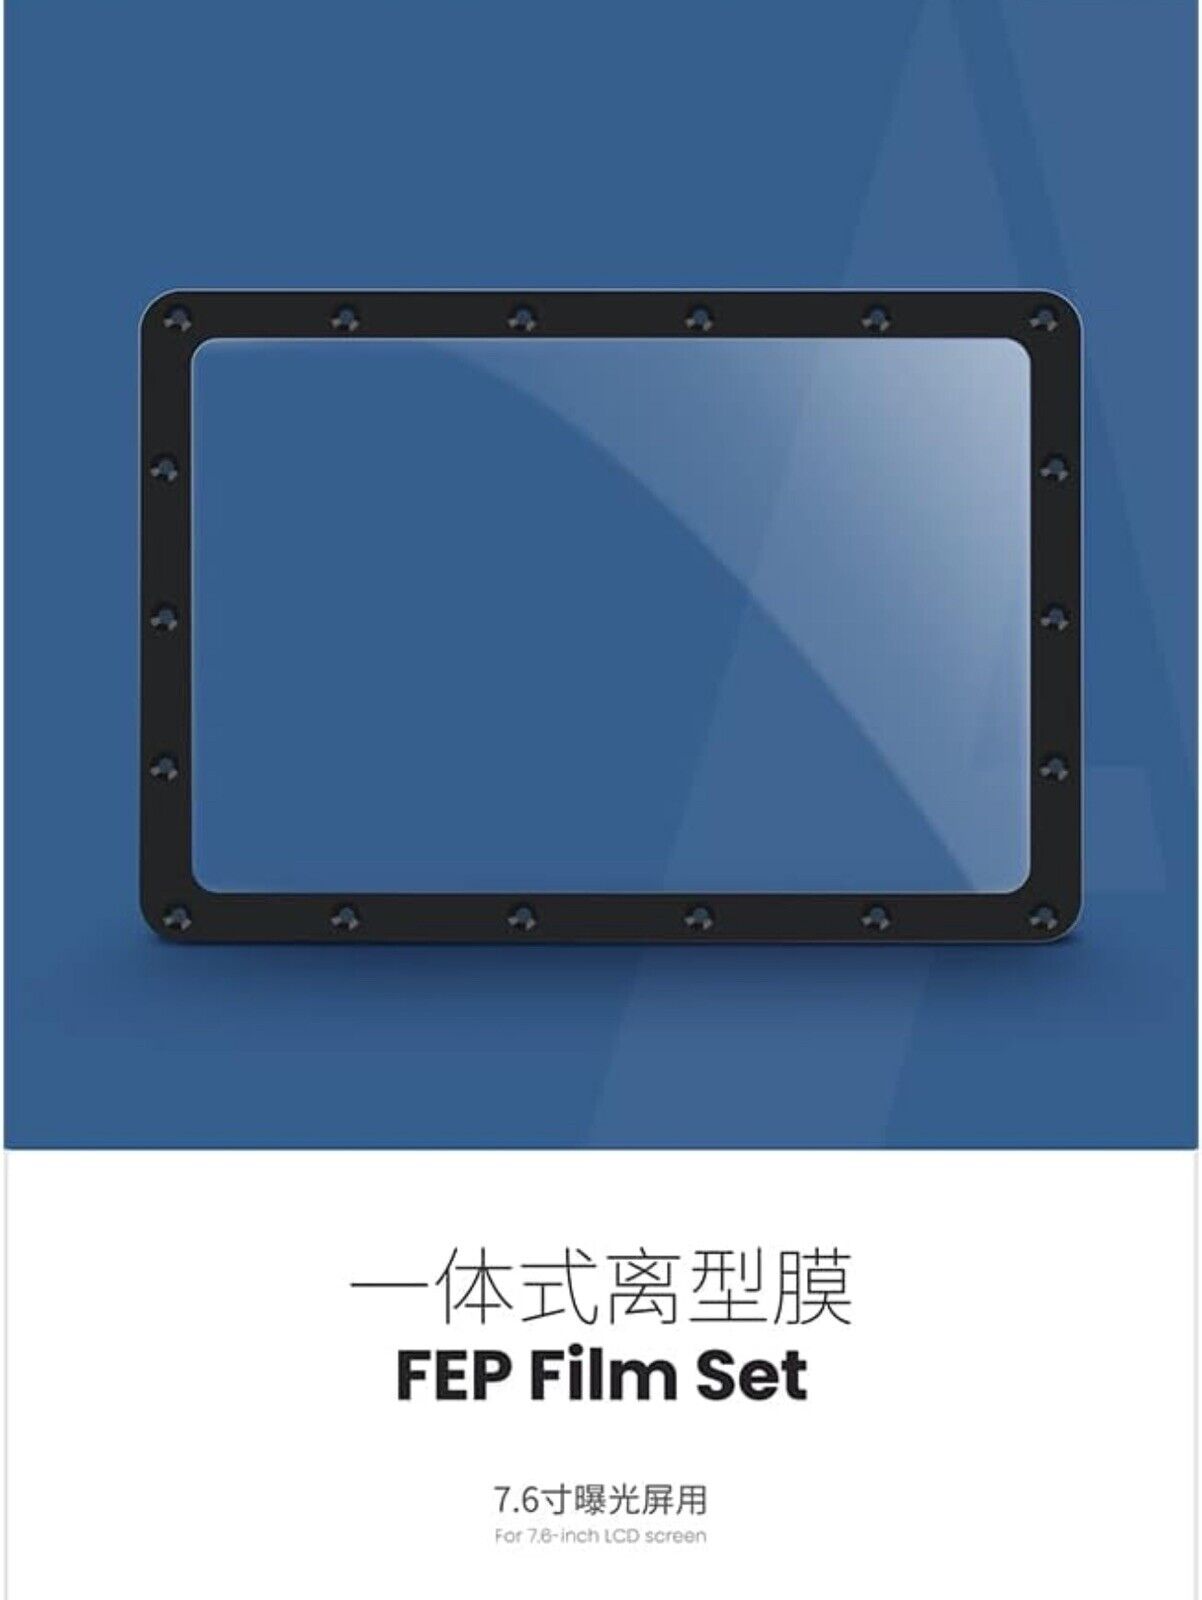 Anycubic 2PCS FEP Film Set for Photon M3 7.6 Inch LCD Resin 3D Printer US Stock